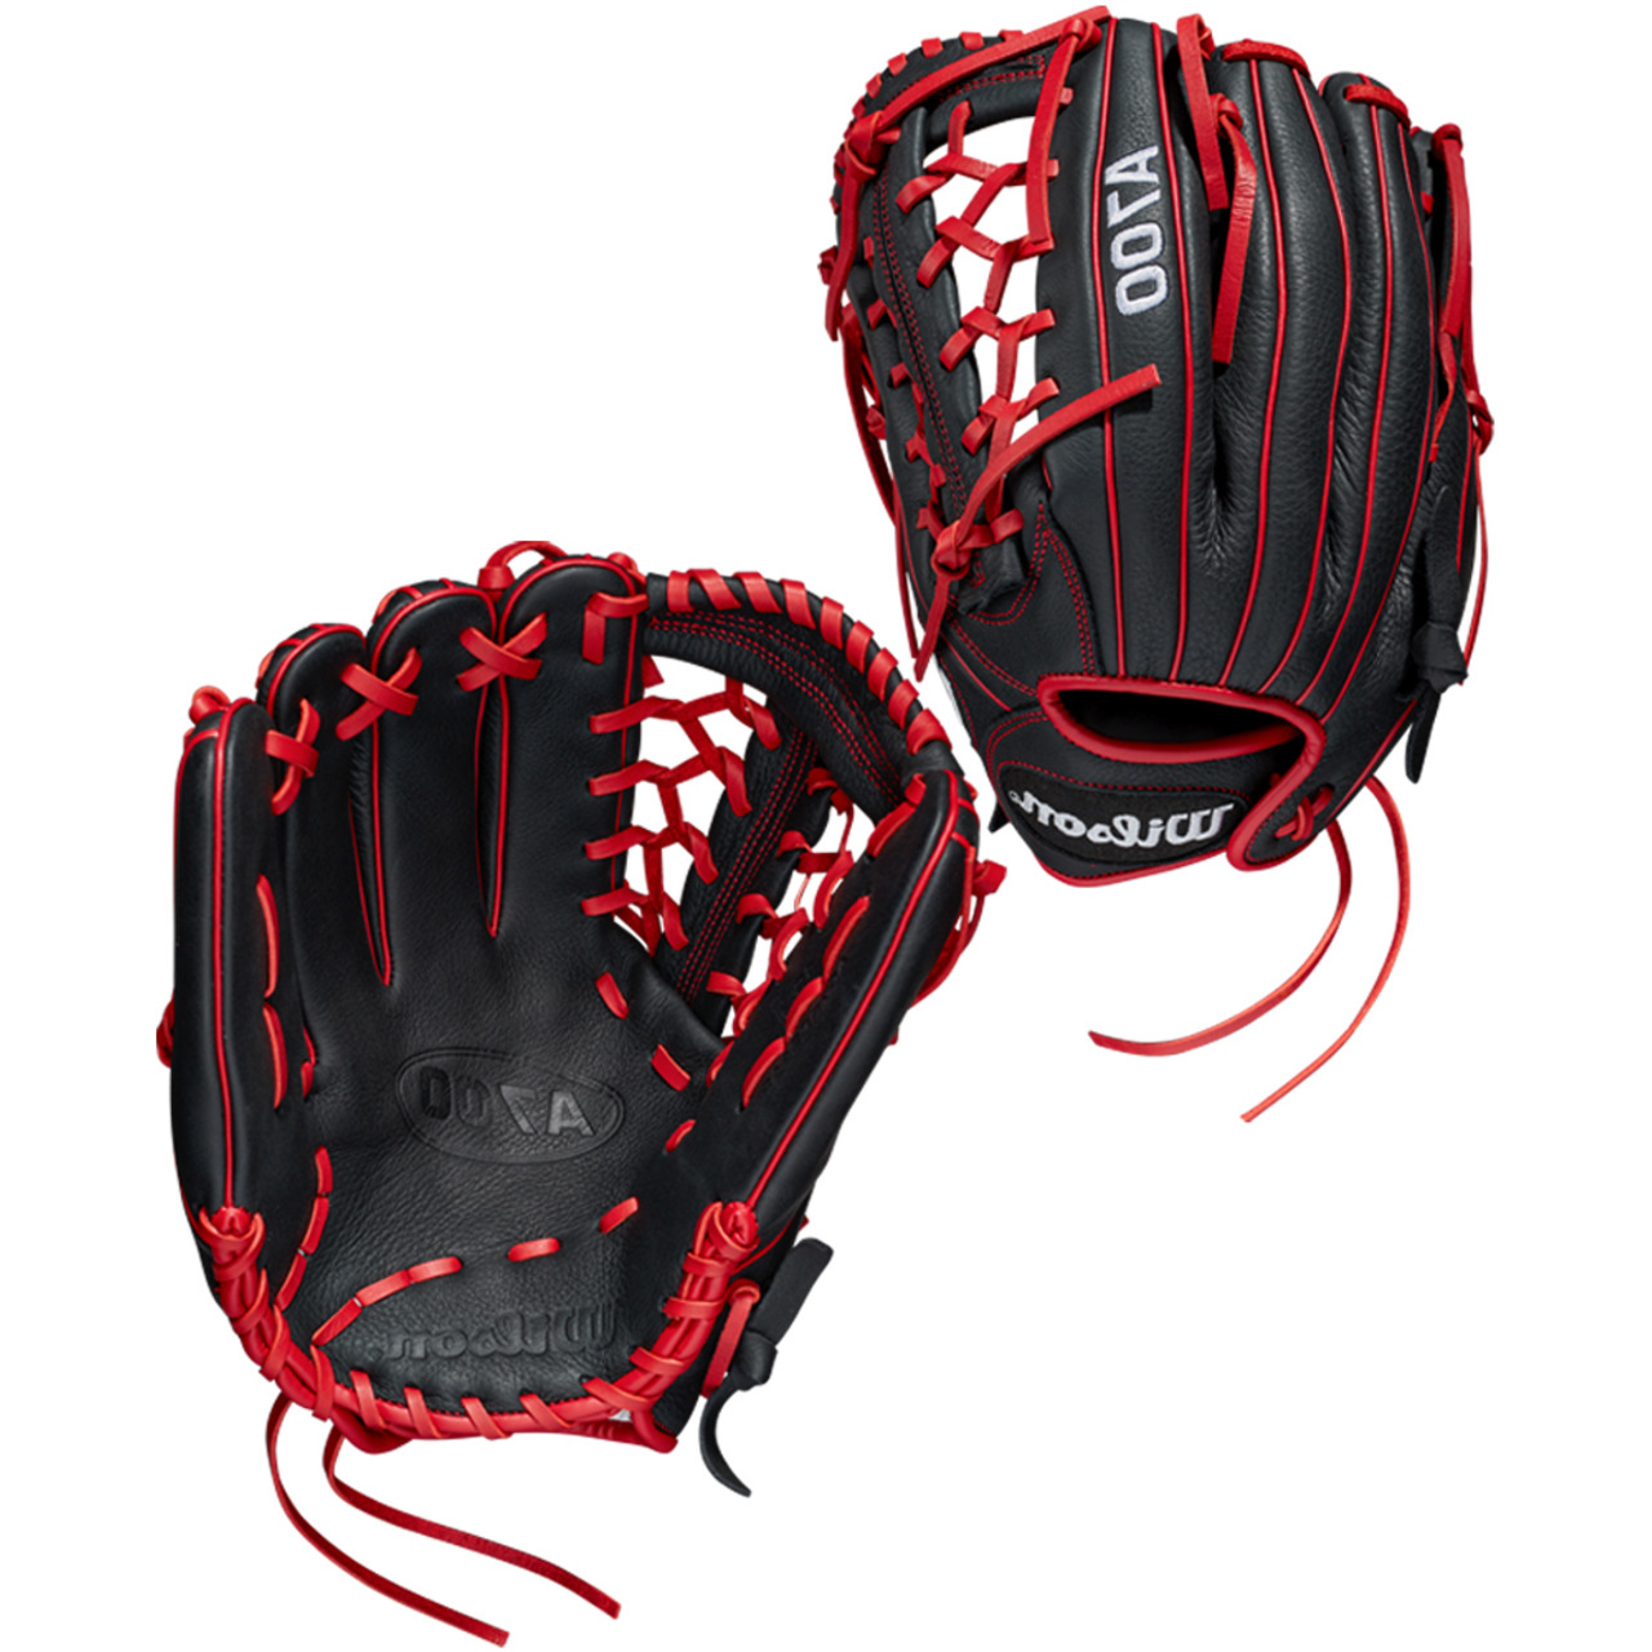 Wilson Wilson Baseball Glove, A700, Full Right, 12”, Outfield Pattern, Blk/Red/Wht